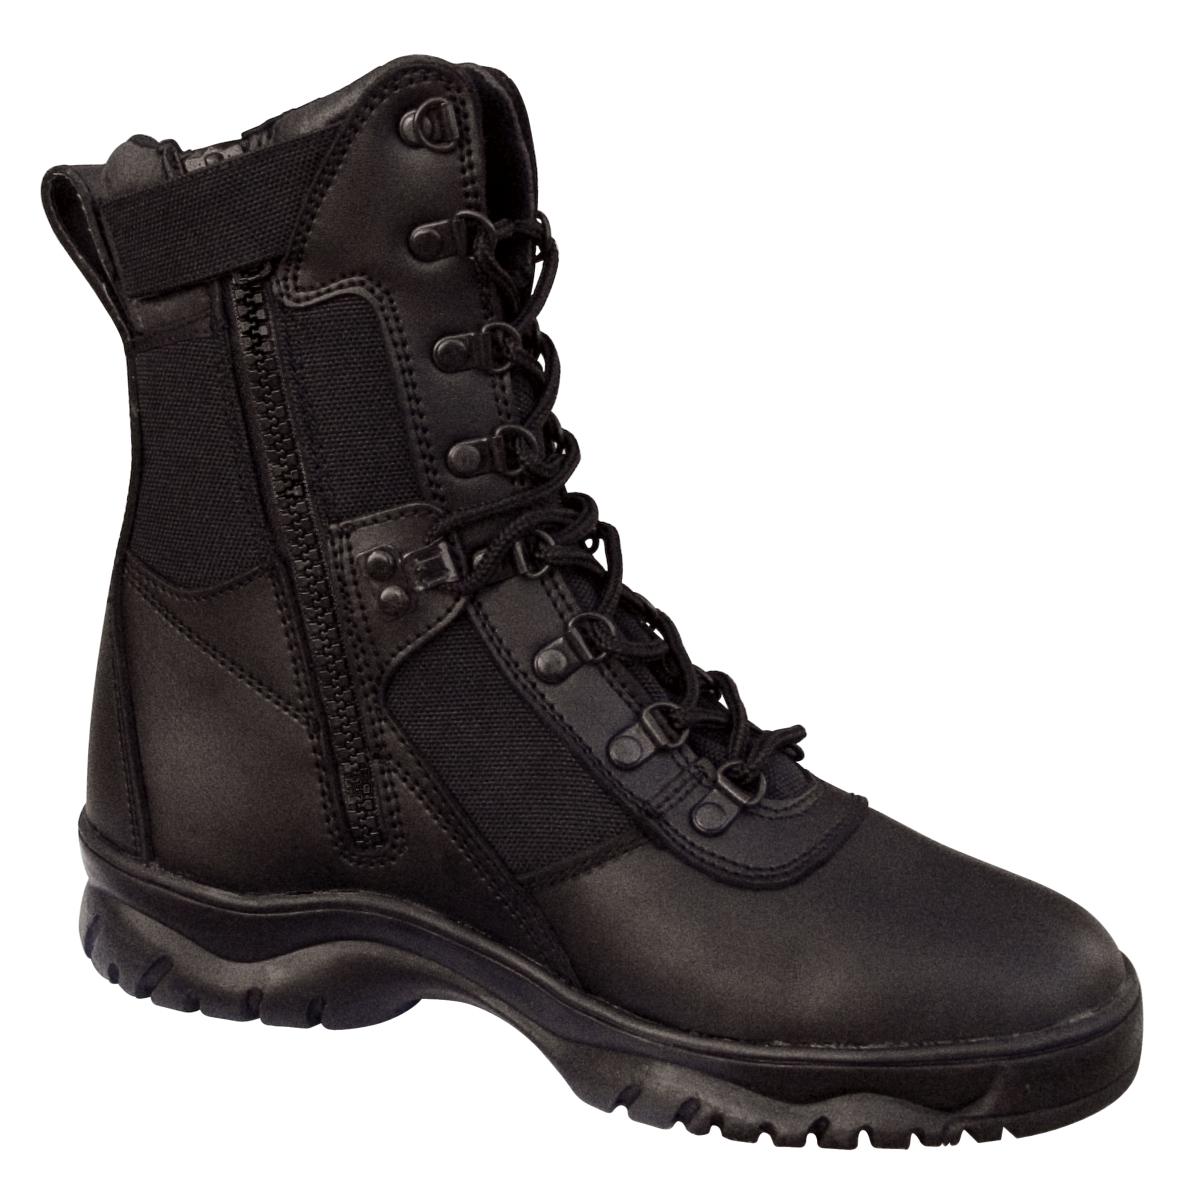 Rothco Forced Entry 5053 Black Tactical 